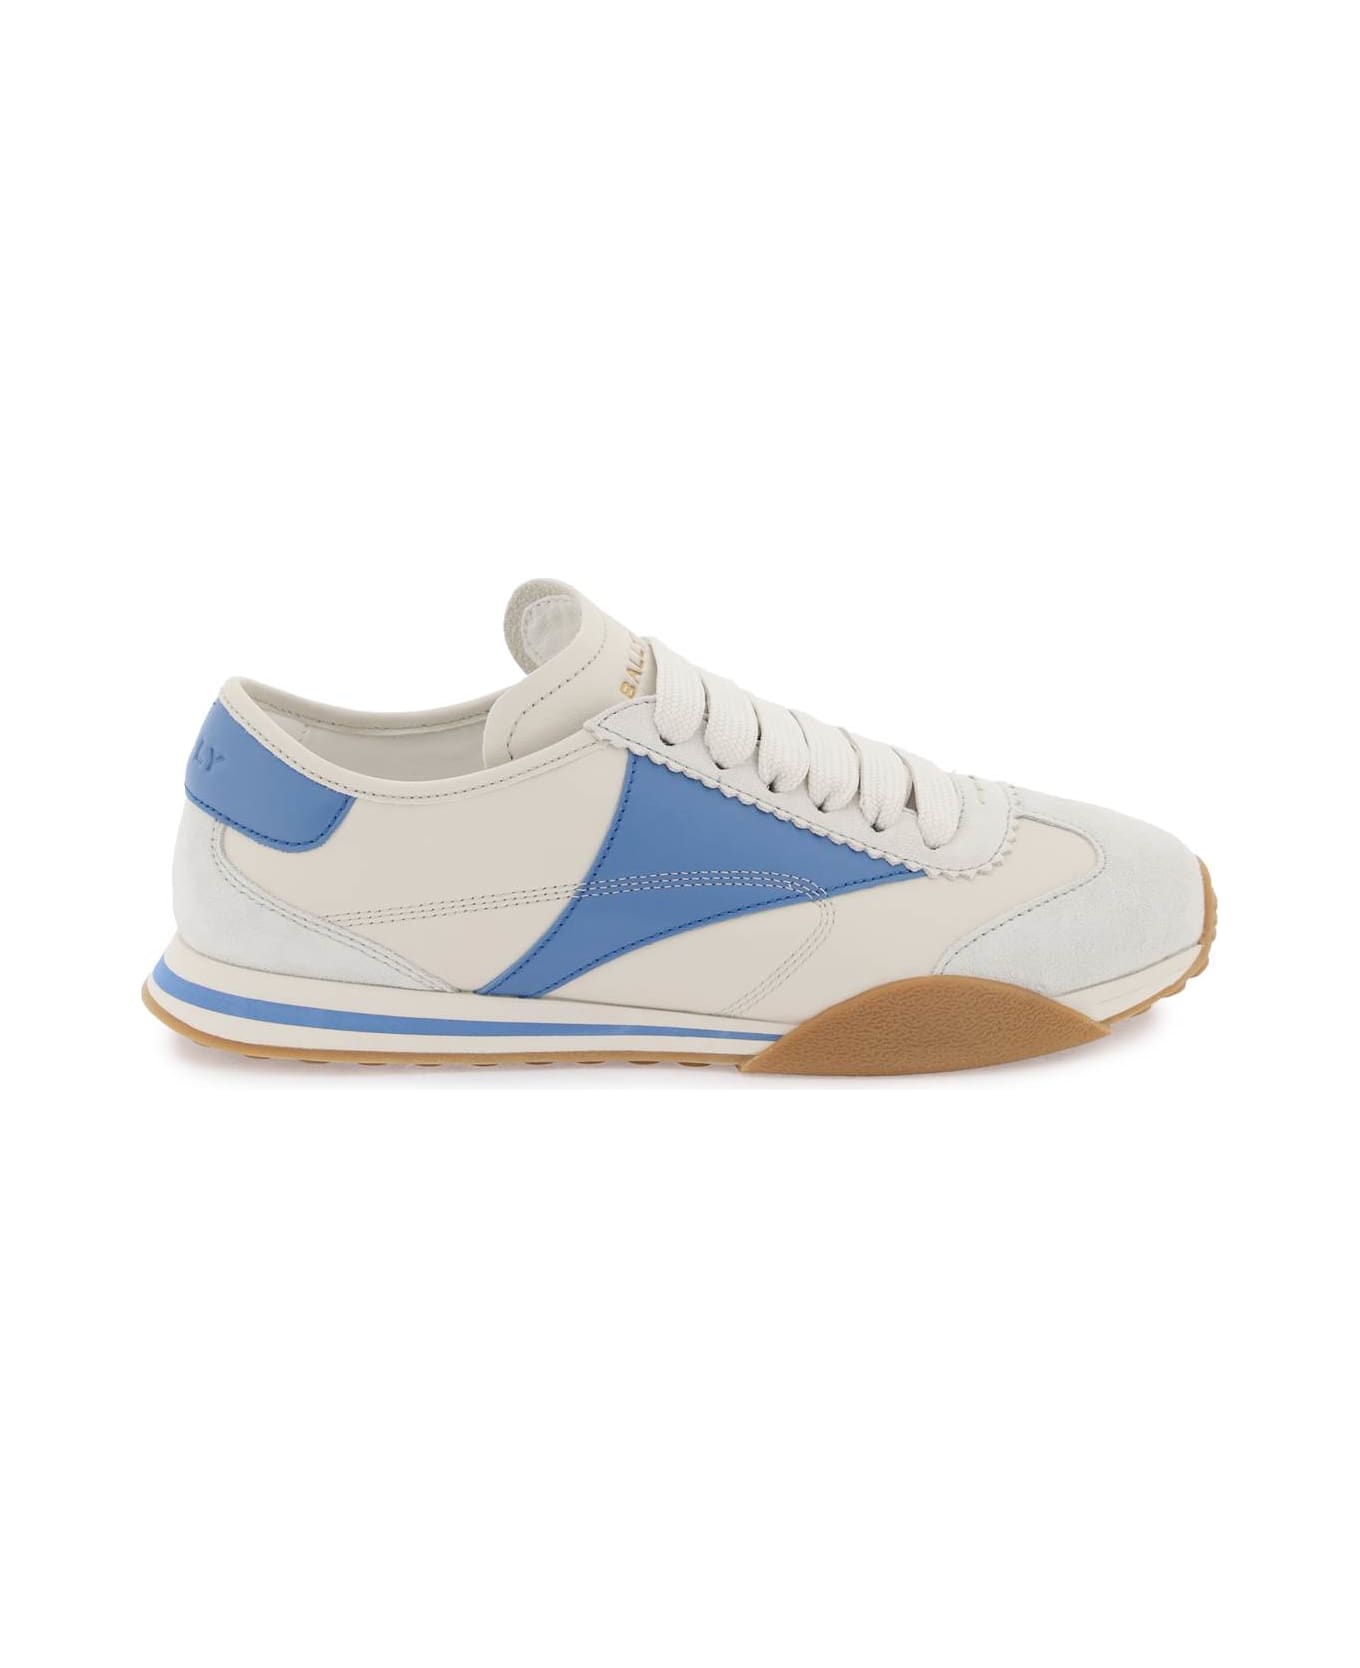 Bally Leather Sonney Sneakers - DUSTYWHITE BLUE KISS (Grey)